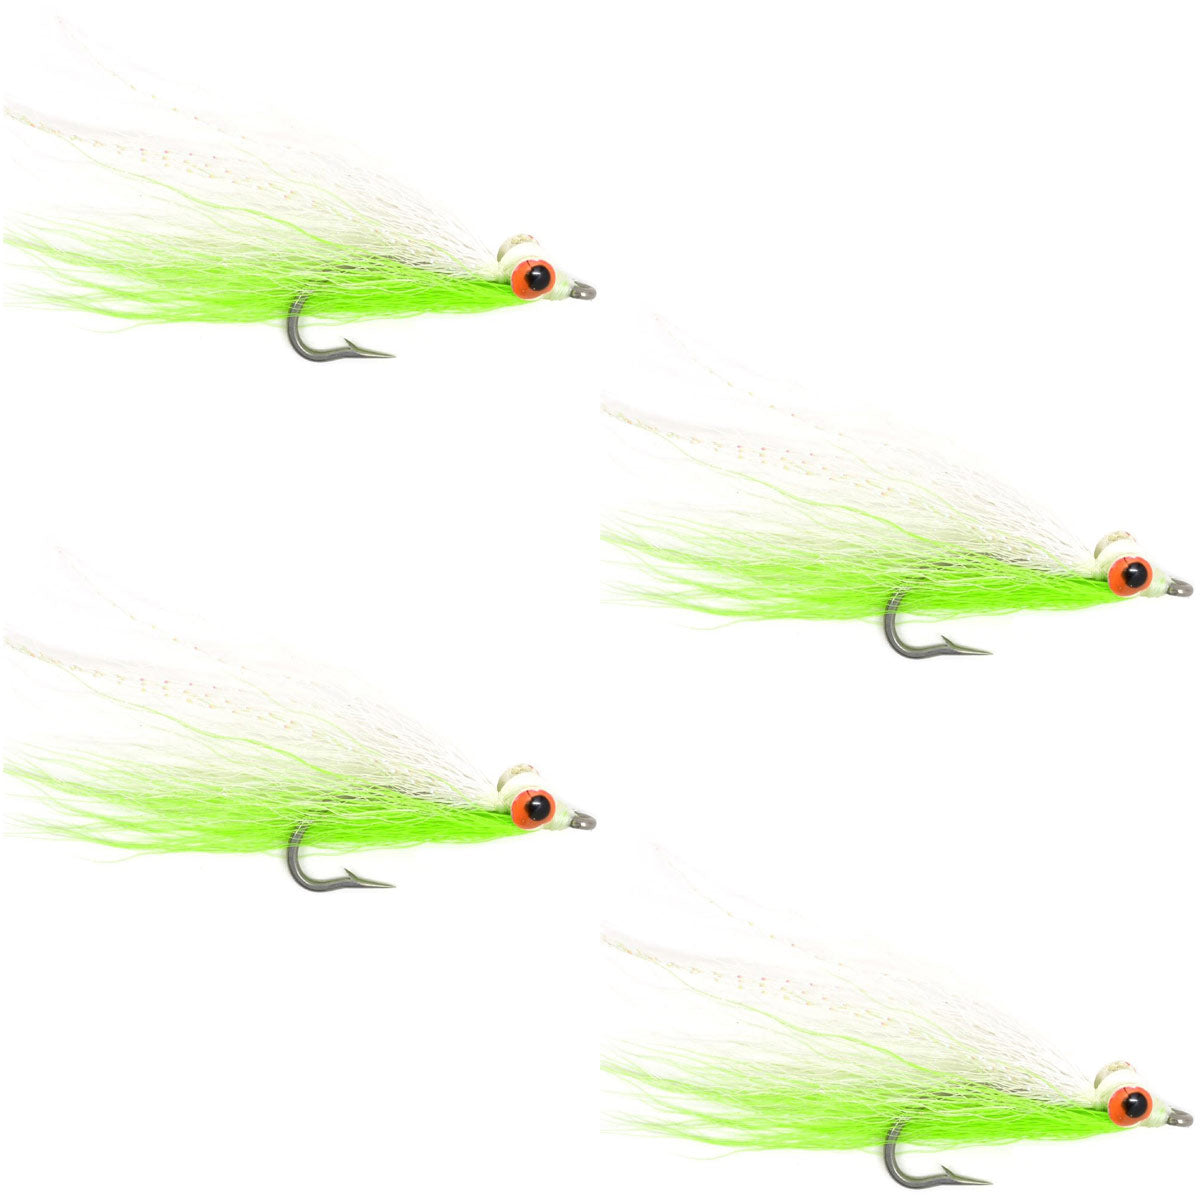 Clousers Deep Minnow Chartreuse White - Streamer Fly Fishing Flies - 4 Saltwater and Bass Flies - Hook Size 1/0